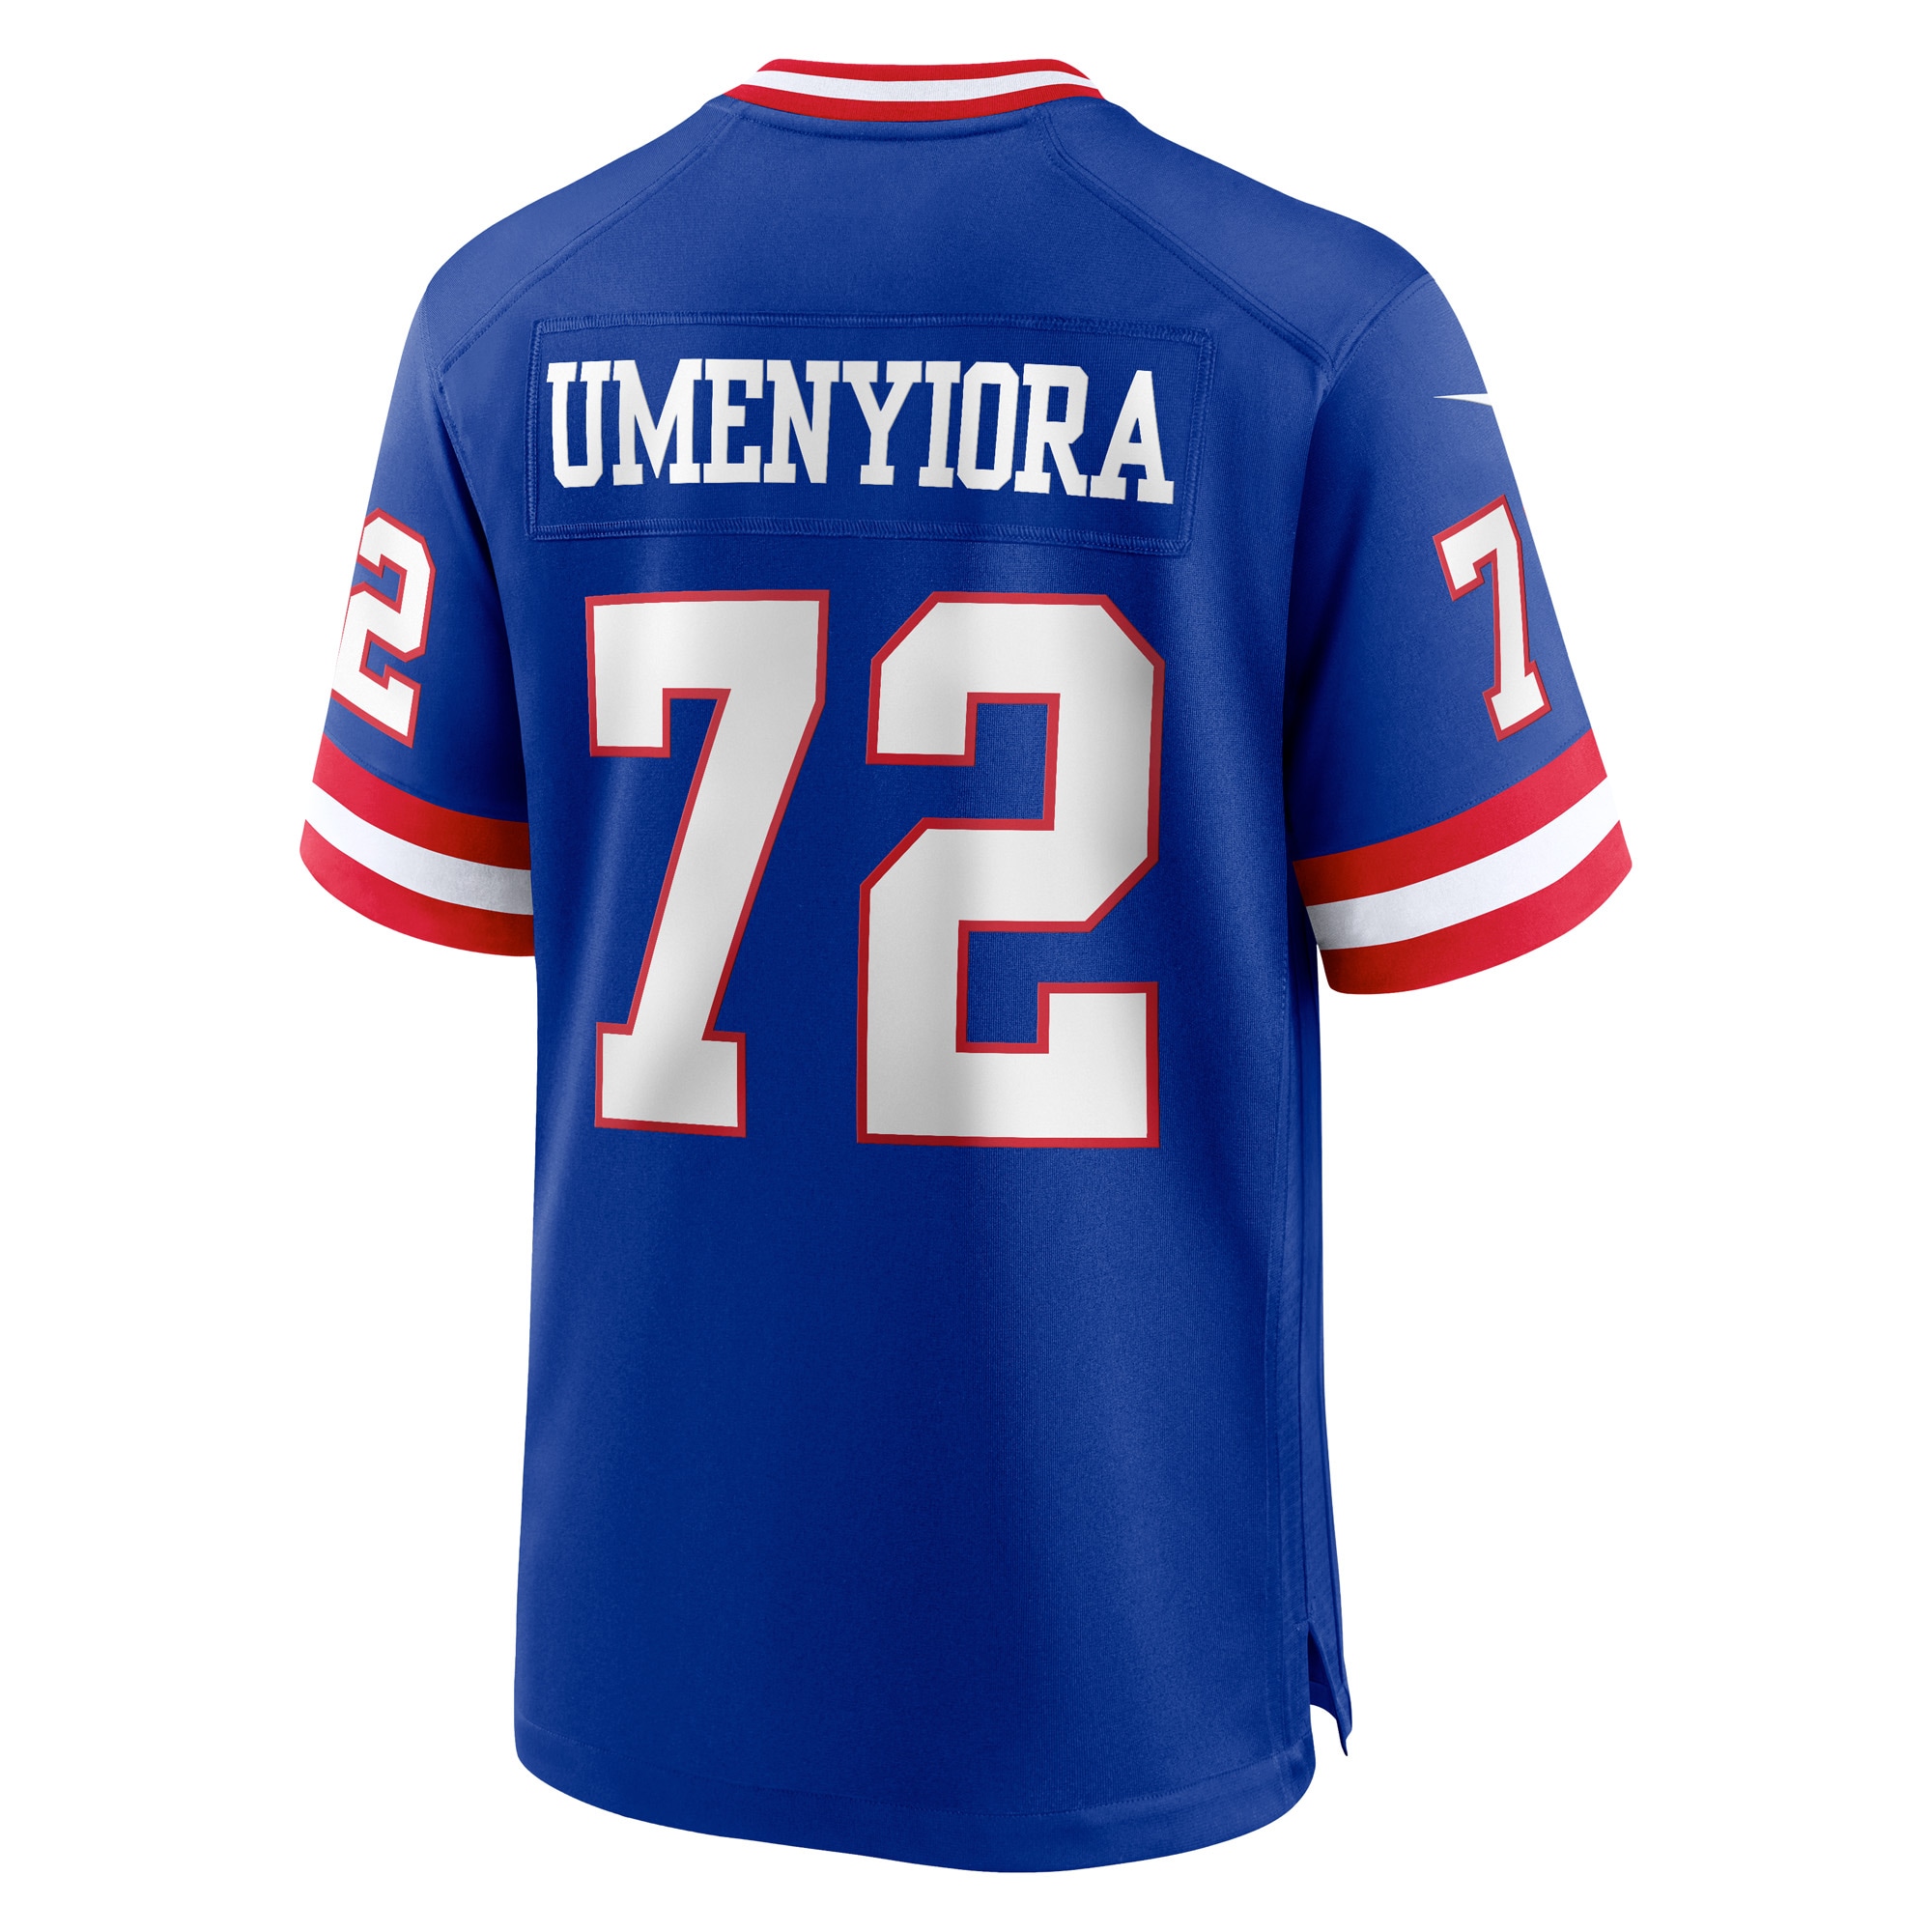 Men's New York Giants Jerseys Royal Osi Umenyiora Classic Retired Player Game Style